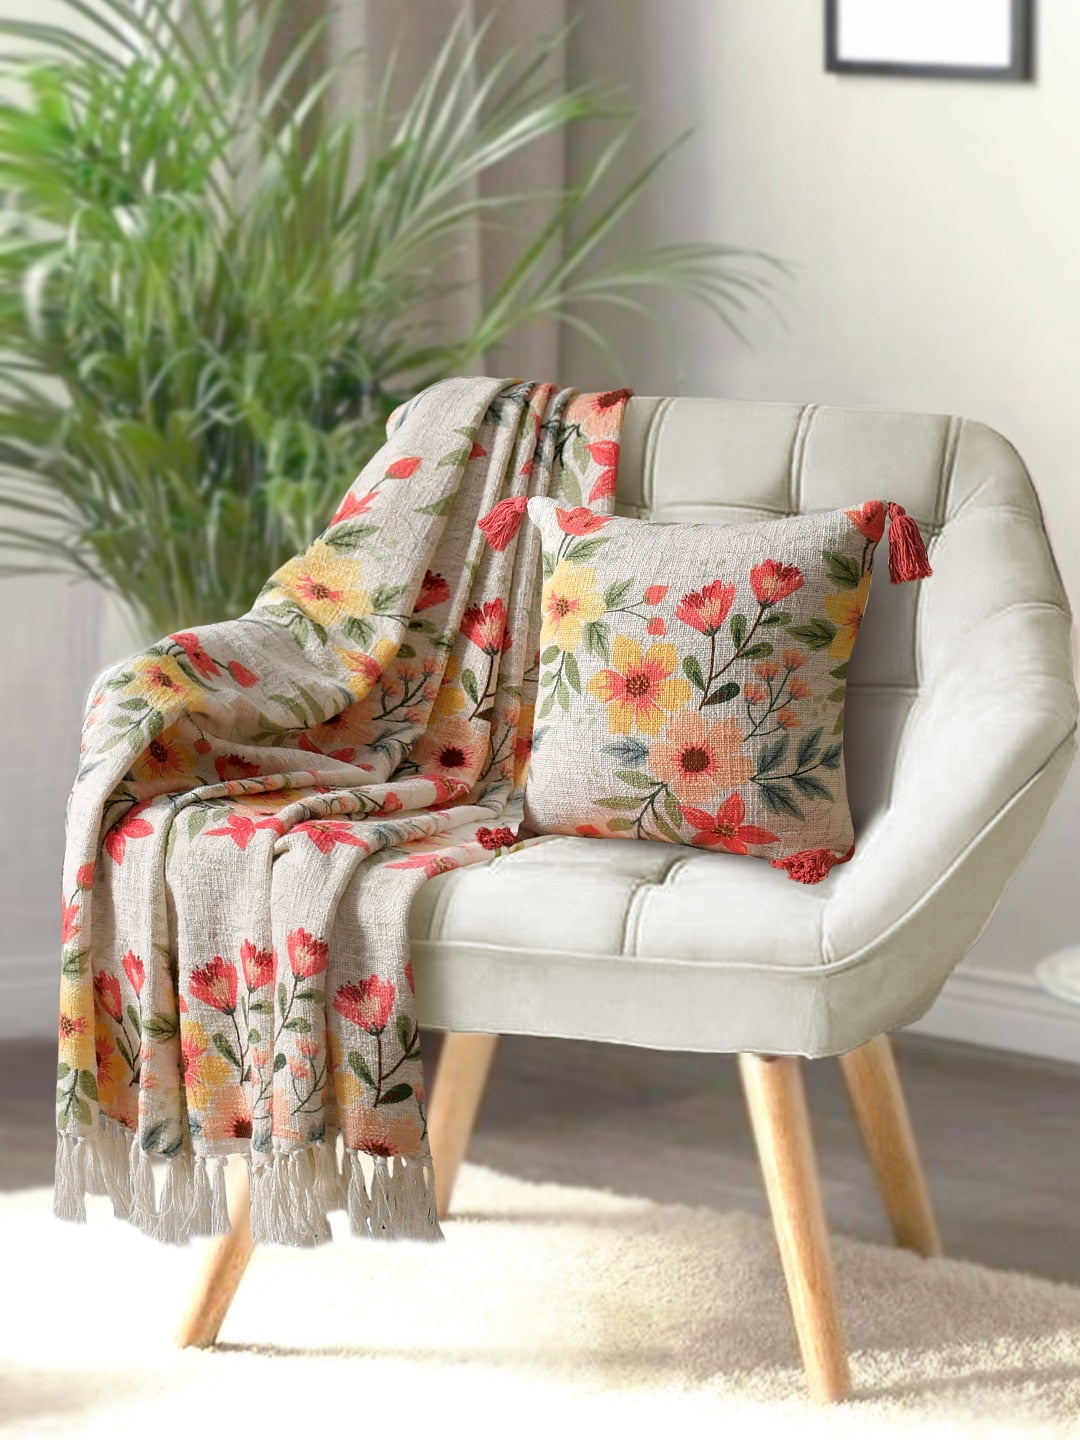 Blanc9 Blossom Cotton Printed Throw with Cushion Cover